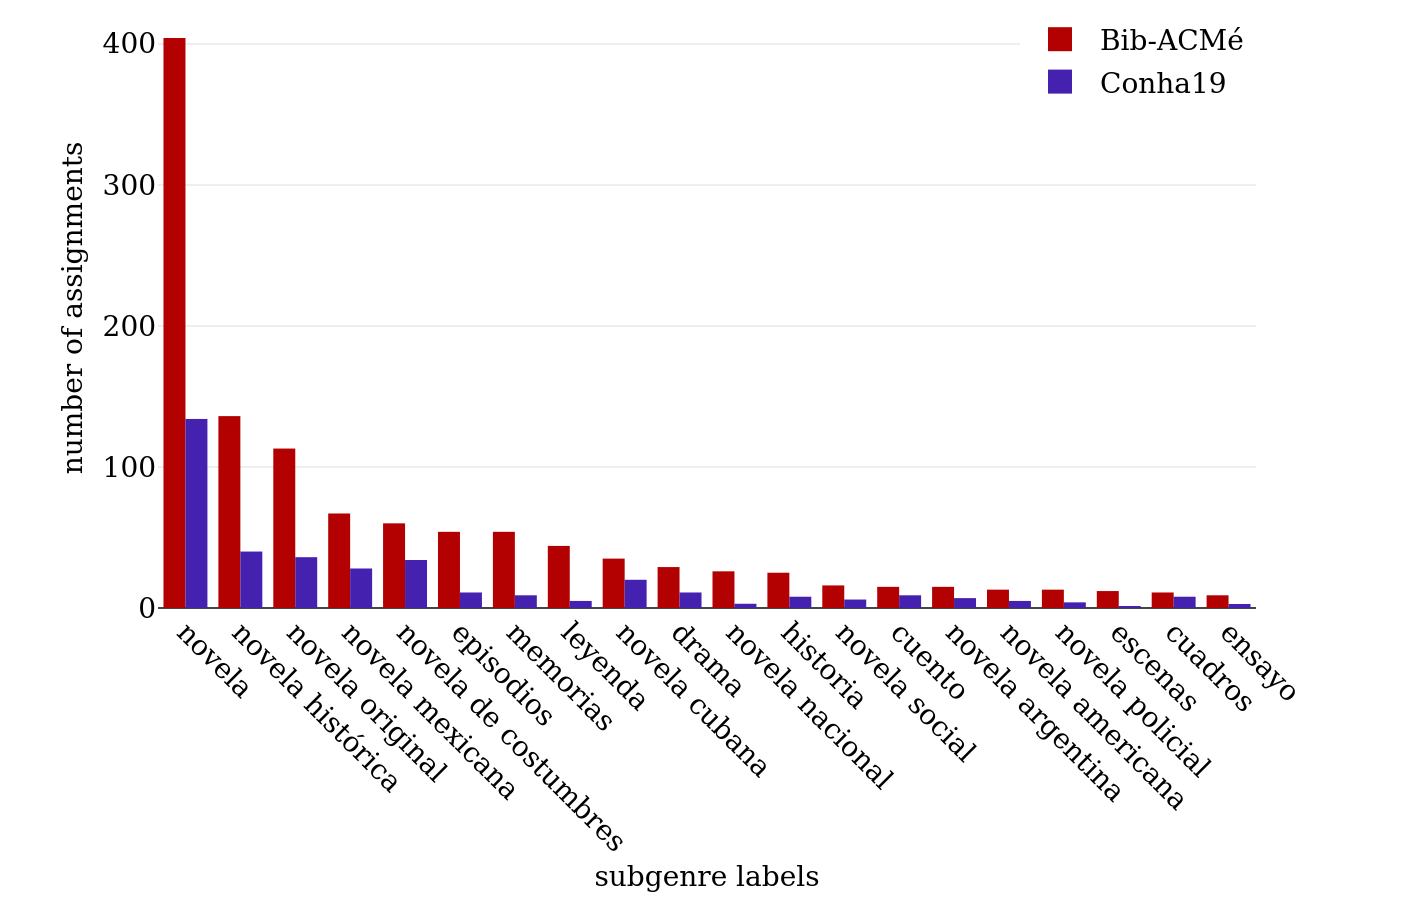 Top 20 most frequent explicit subgenre labels in the bibliography.